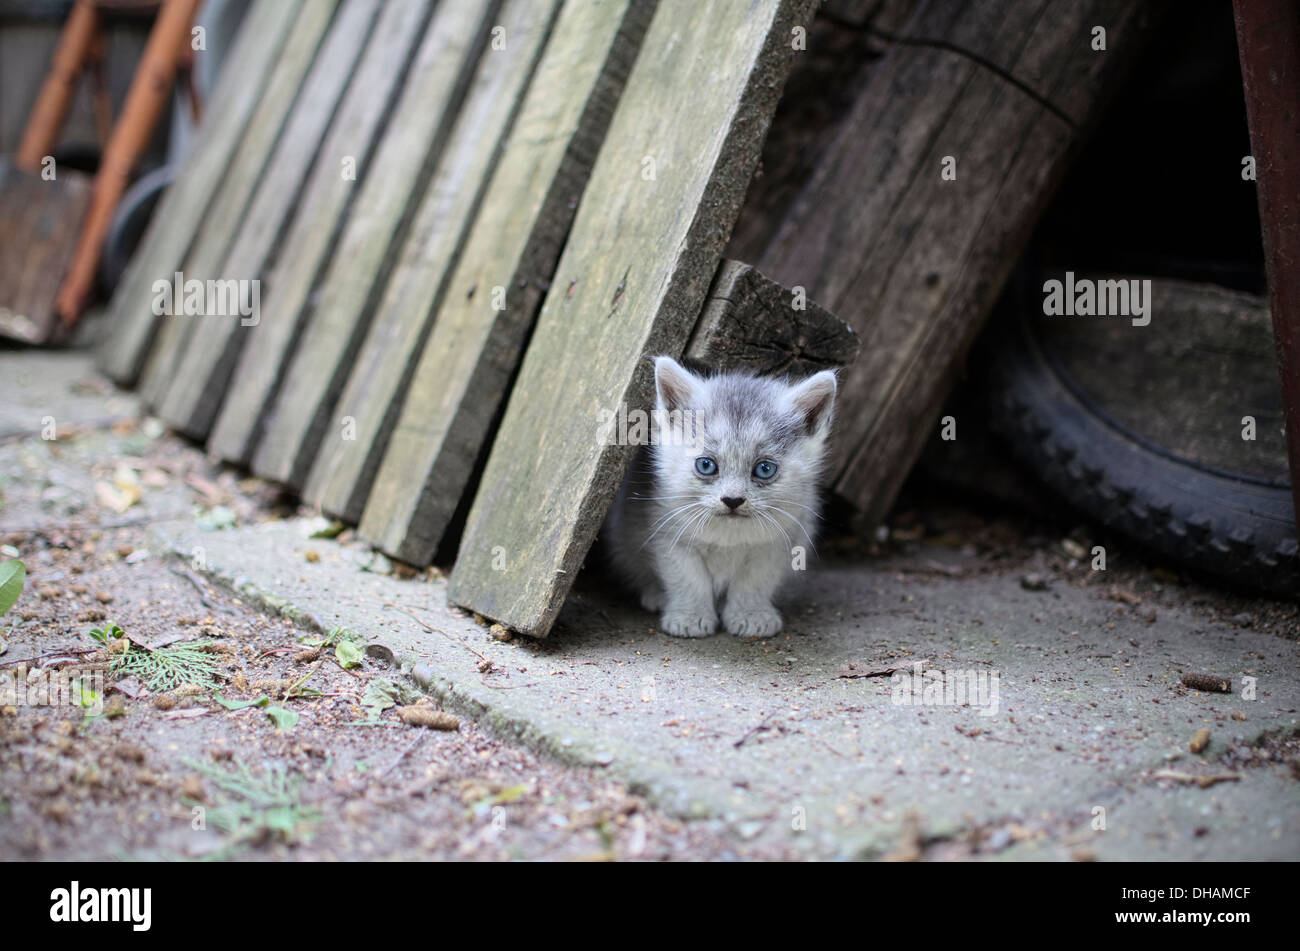 Blue Eyed Kitten Looking Relaxed in the Yard Stock Photo